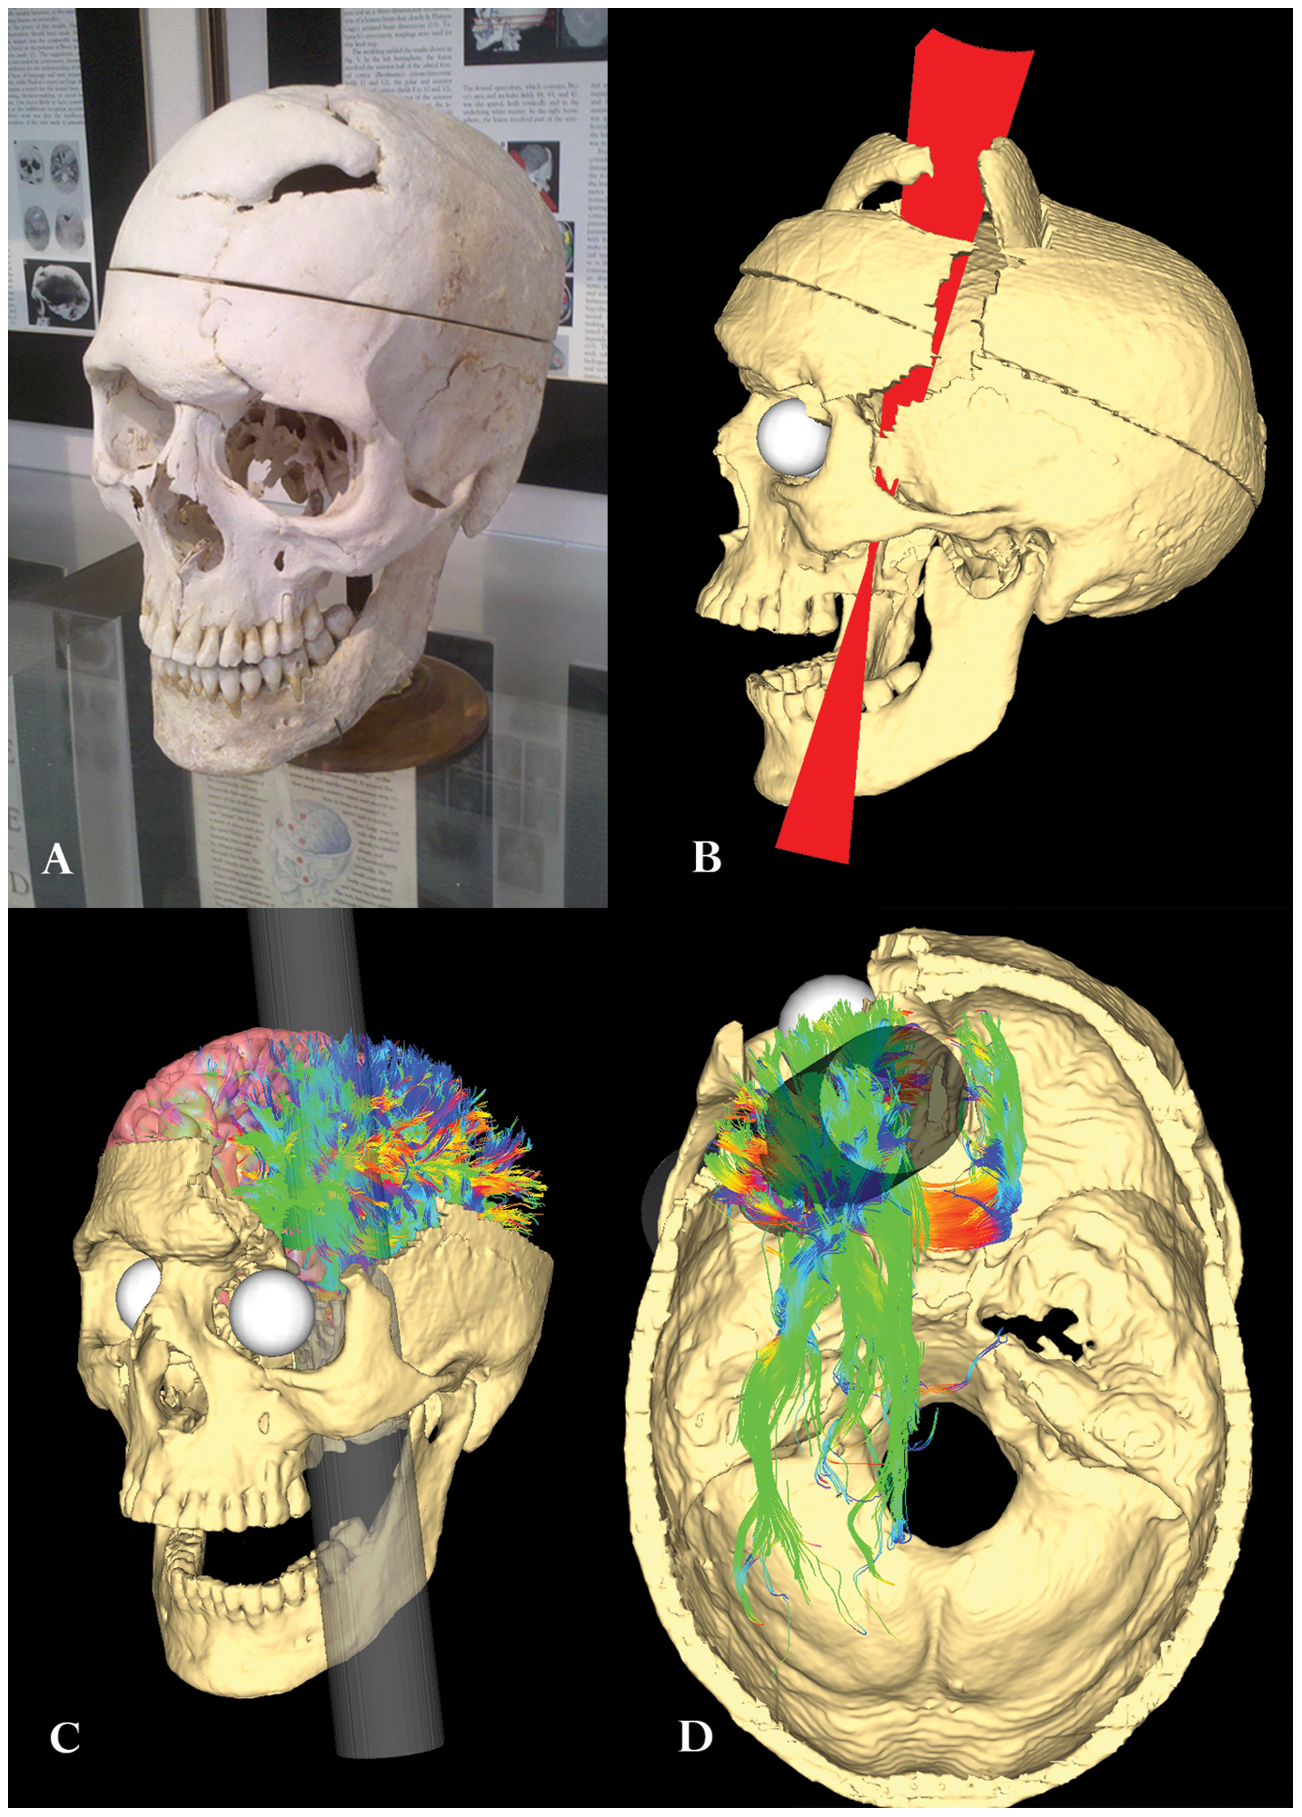 Diagram of injury to Phineas Gage